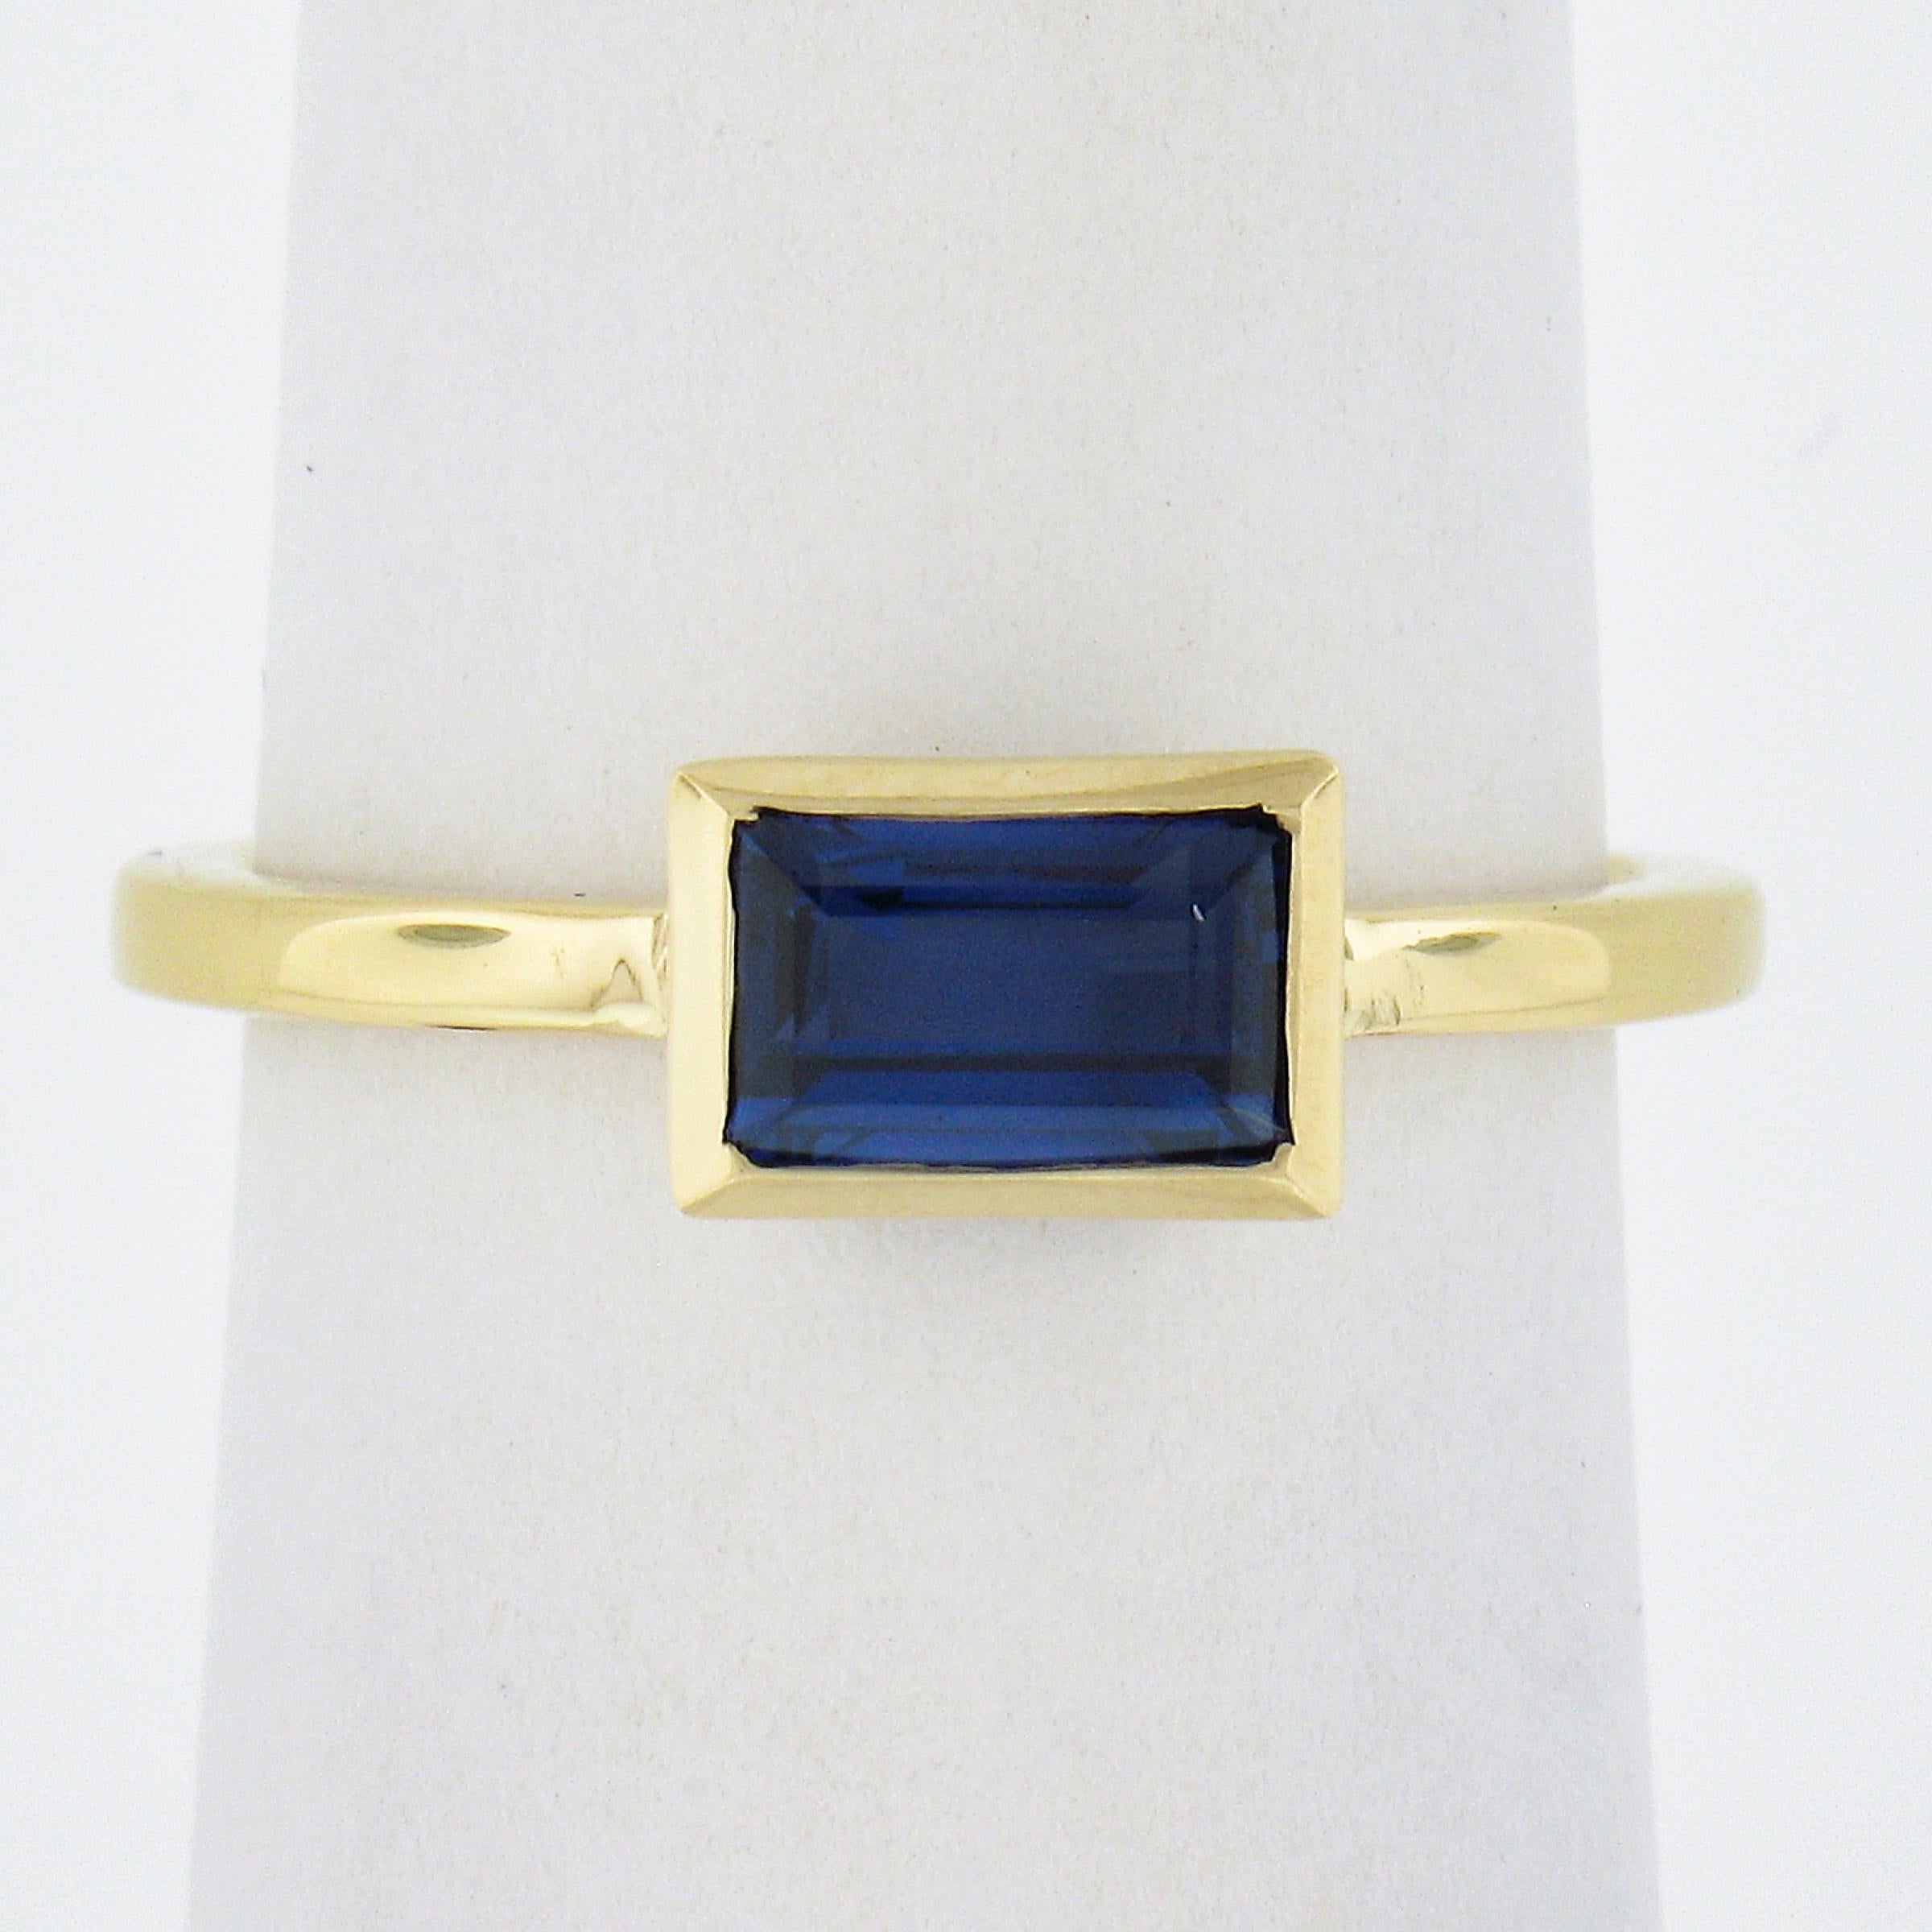 --Stone(s):--
(1) Natural Genuine Sapphire - Elongated Rectangular Step Cut - Bezel Set - Blue Color - 1.05ct (exact - certified) - VERY NICE CLEAN COLOR - NO HEAT
** See Certification Details Below for Complete Info **

Material: Solid 18k Yellow